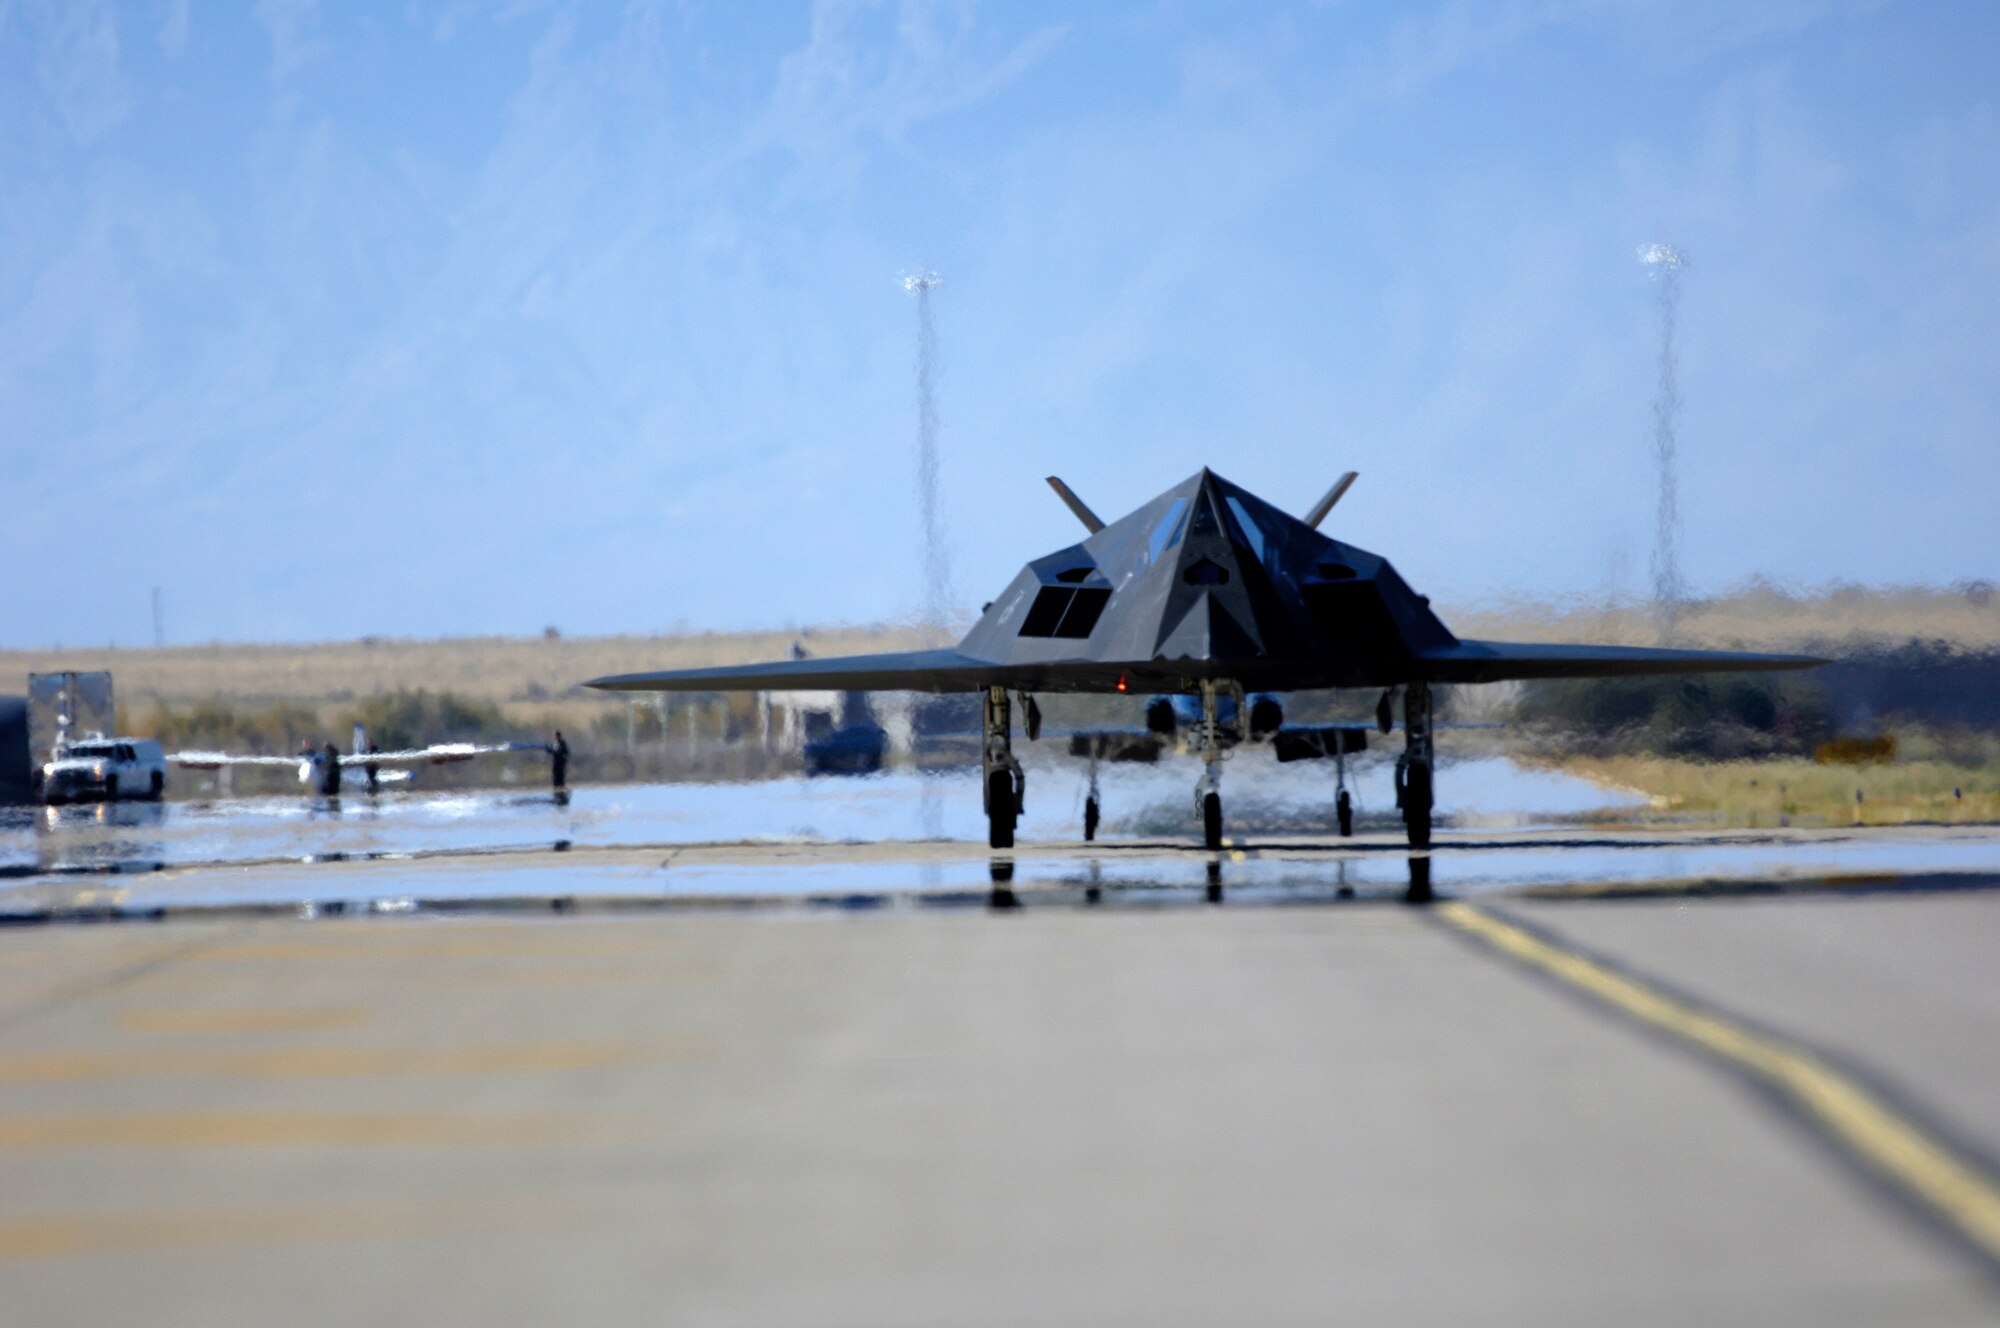 An F-117 Nighthawk taxies down the runway before its flight during the Holloman Air and Space Expo on October 27 2007. The Holloman Air and Space Expo is a showcase of Air Force capabilities, the 49th Fighter Wing mission and the X Prize Foundation (U.S. Air Force Photo by Staff Sgt Jason Colbert)